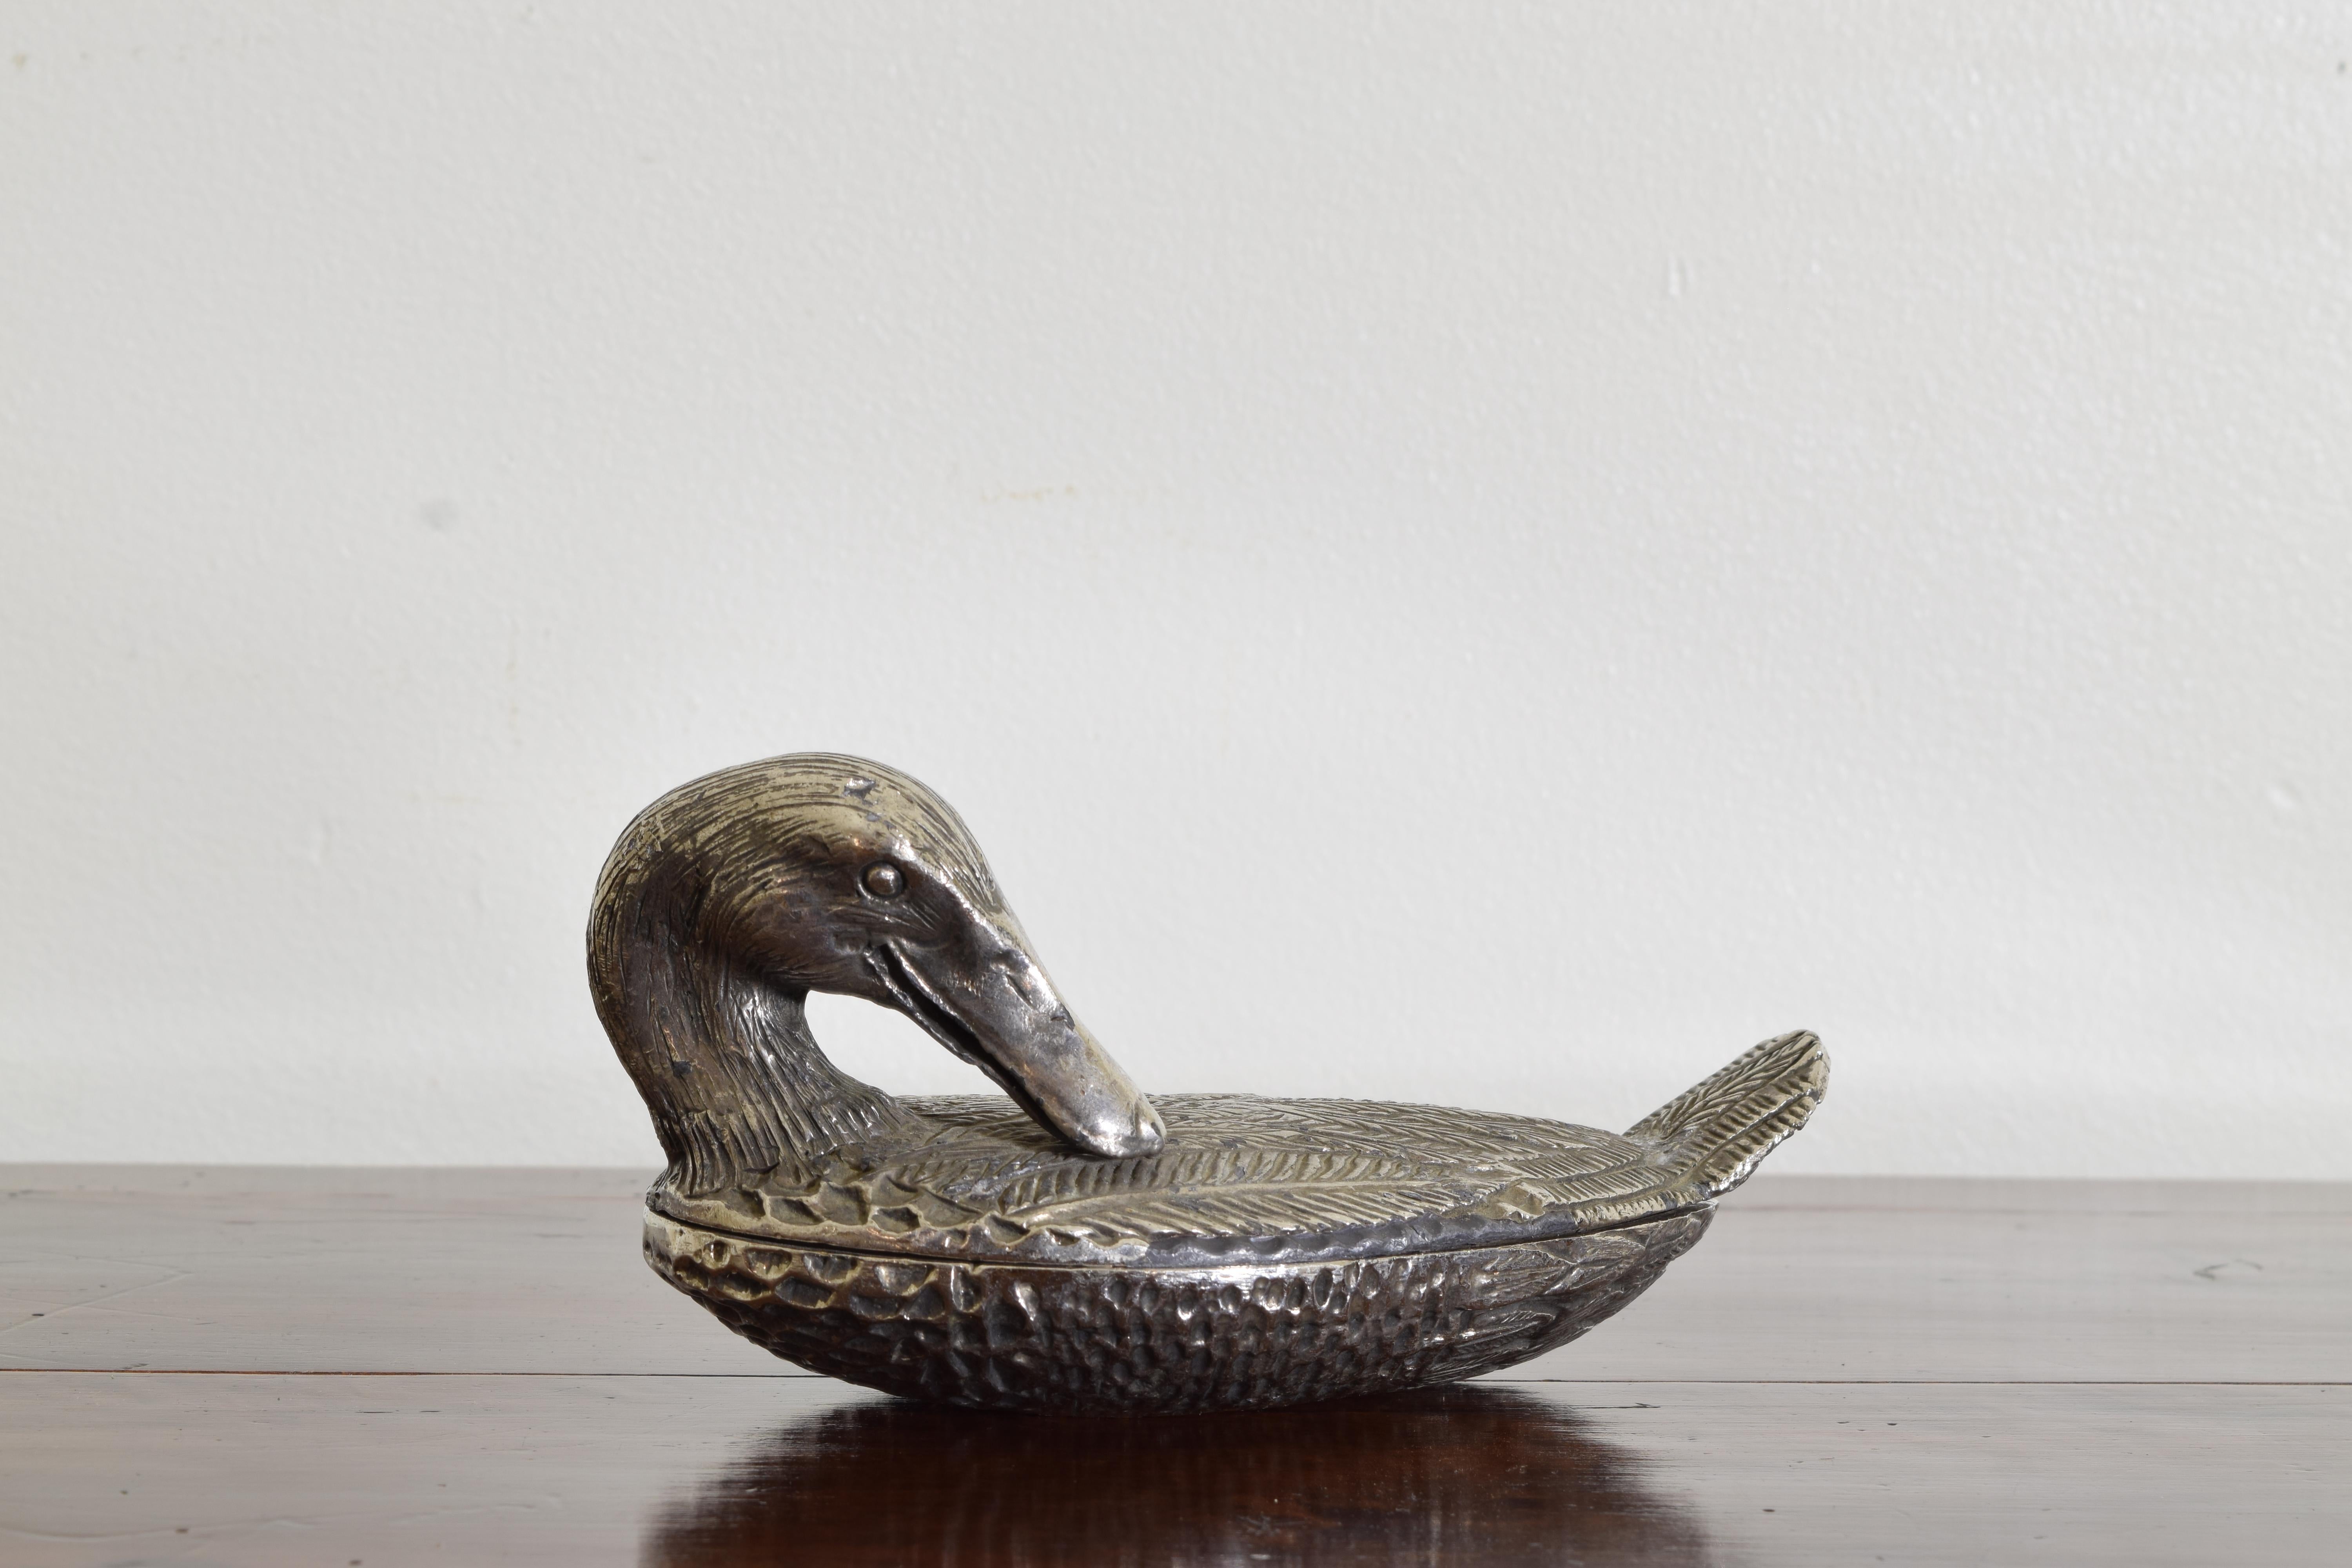 The duck finely cast in repose, in an upper and lower sections